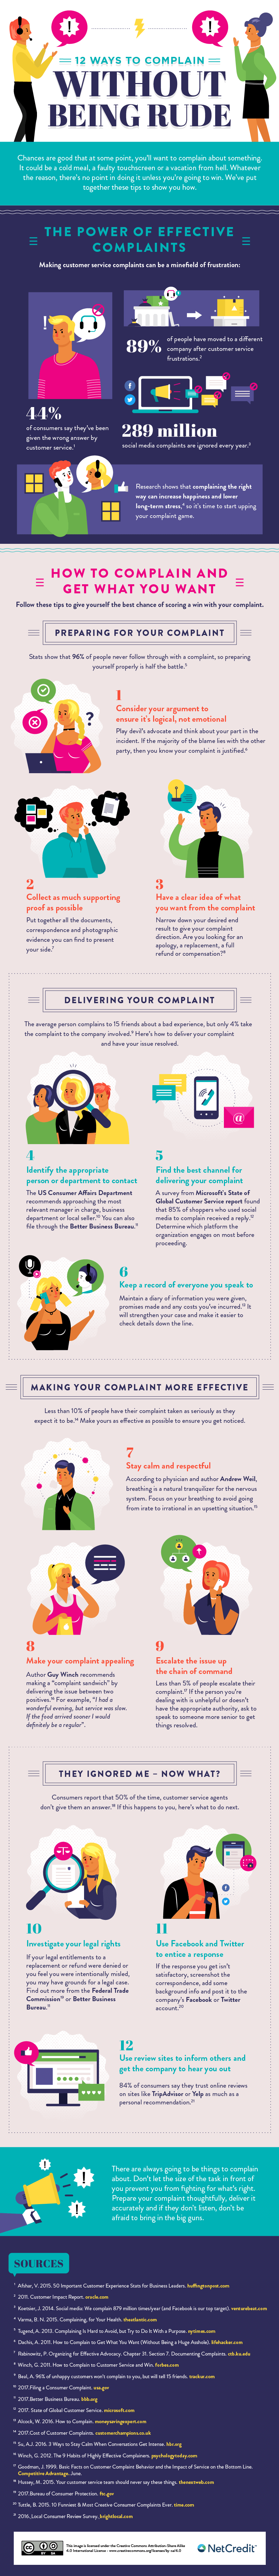 12 Ways to Complain Without Being Rude - #infographic